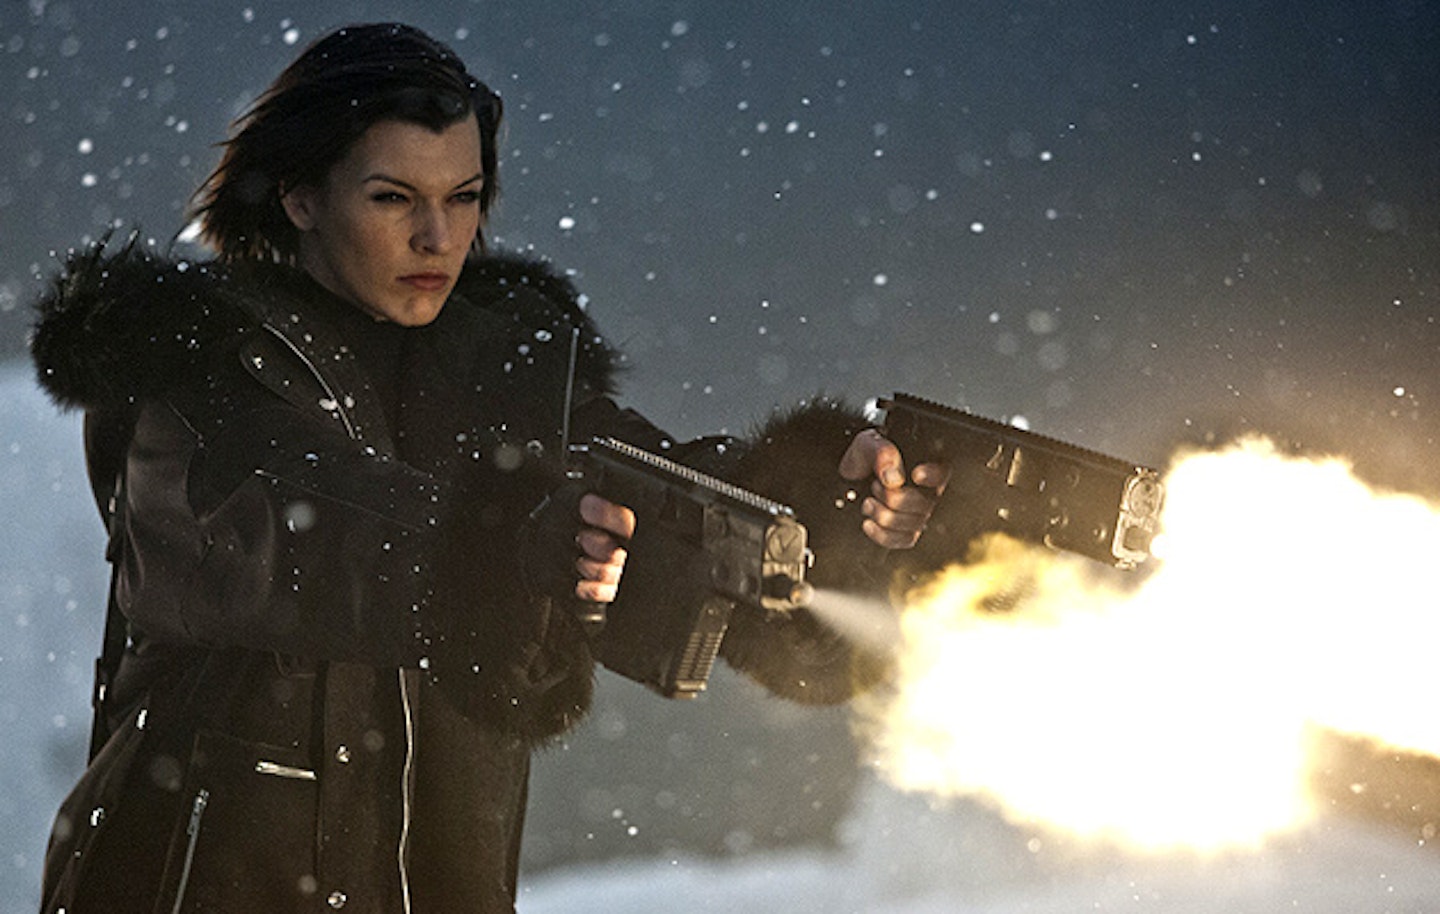 New Image Of Milla Jovovich Released For Resident Evil: The Final Chapter